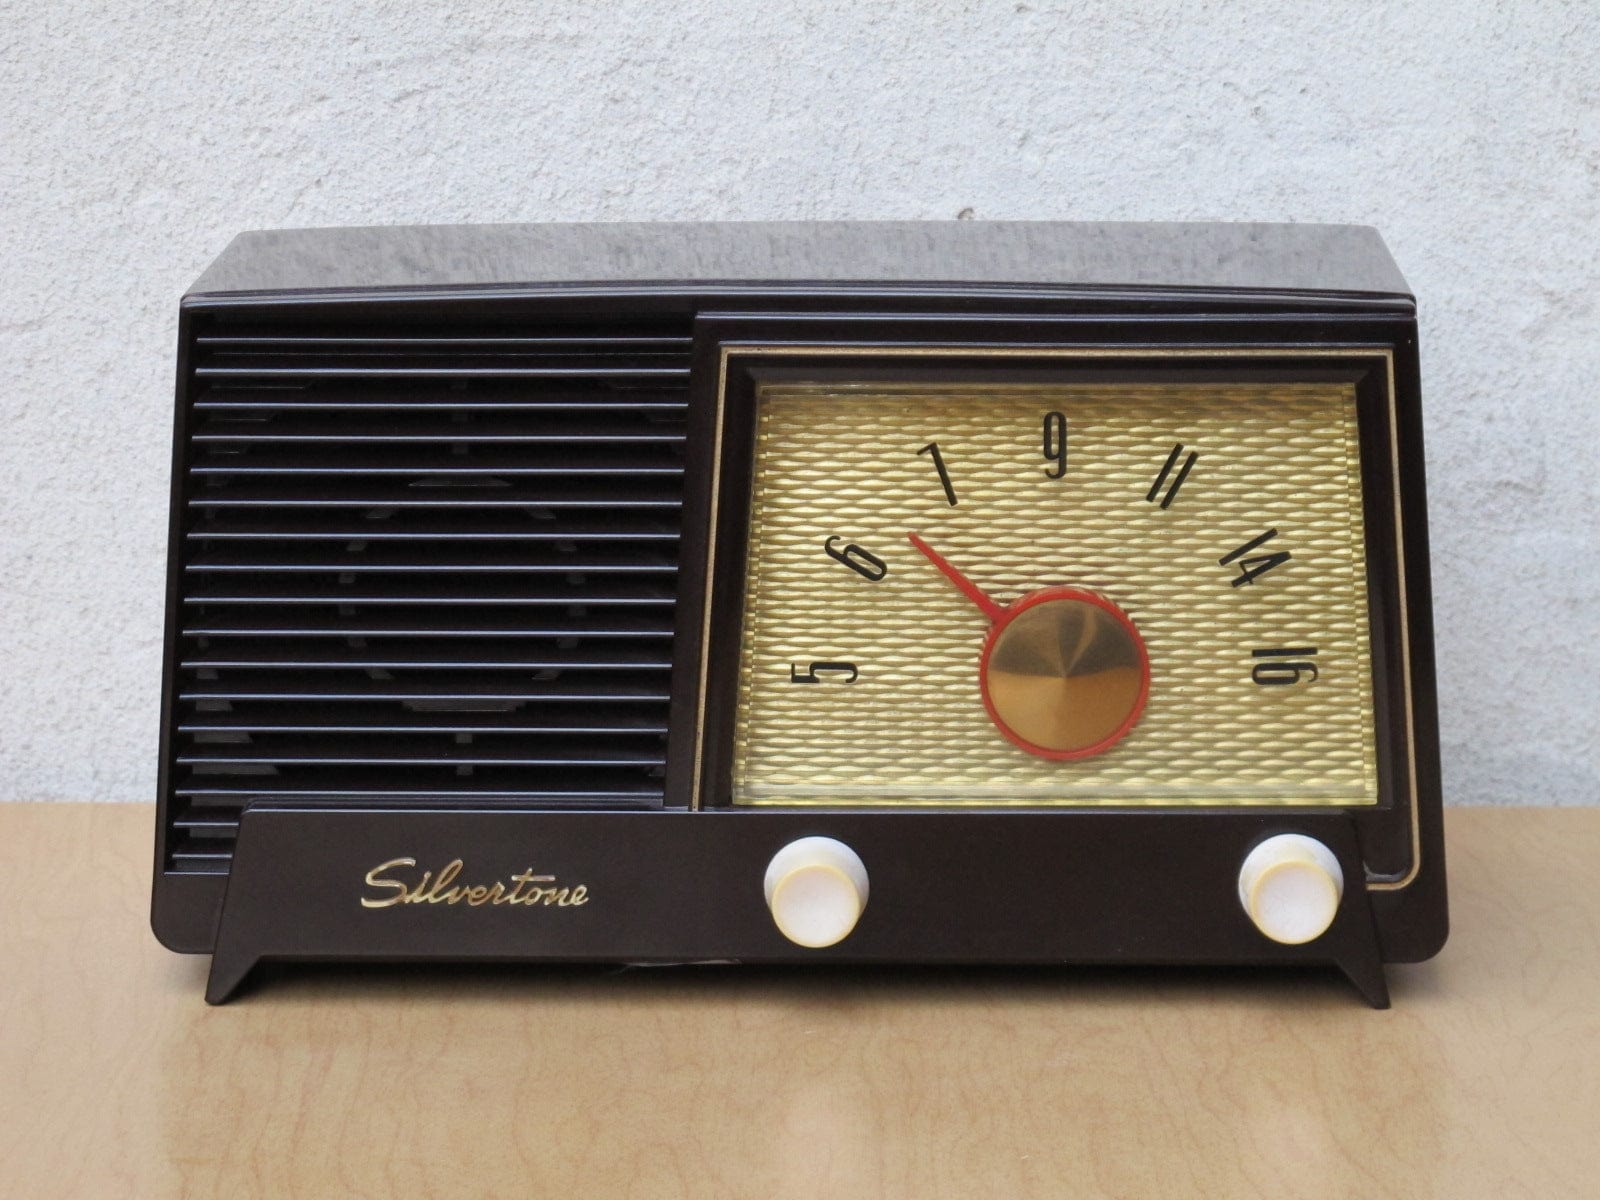 I Like Mike's Mid Century Modern Accessories Sears Silvertone Brown Bakelite Radio from the 1950's